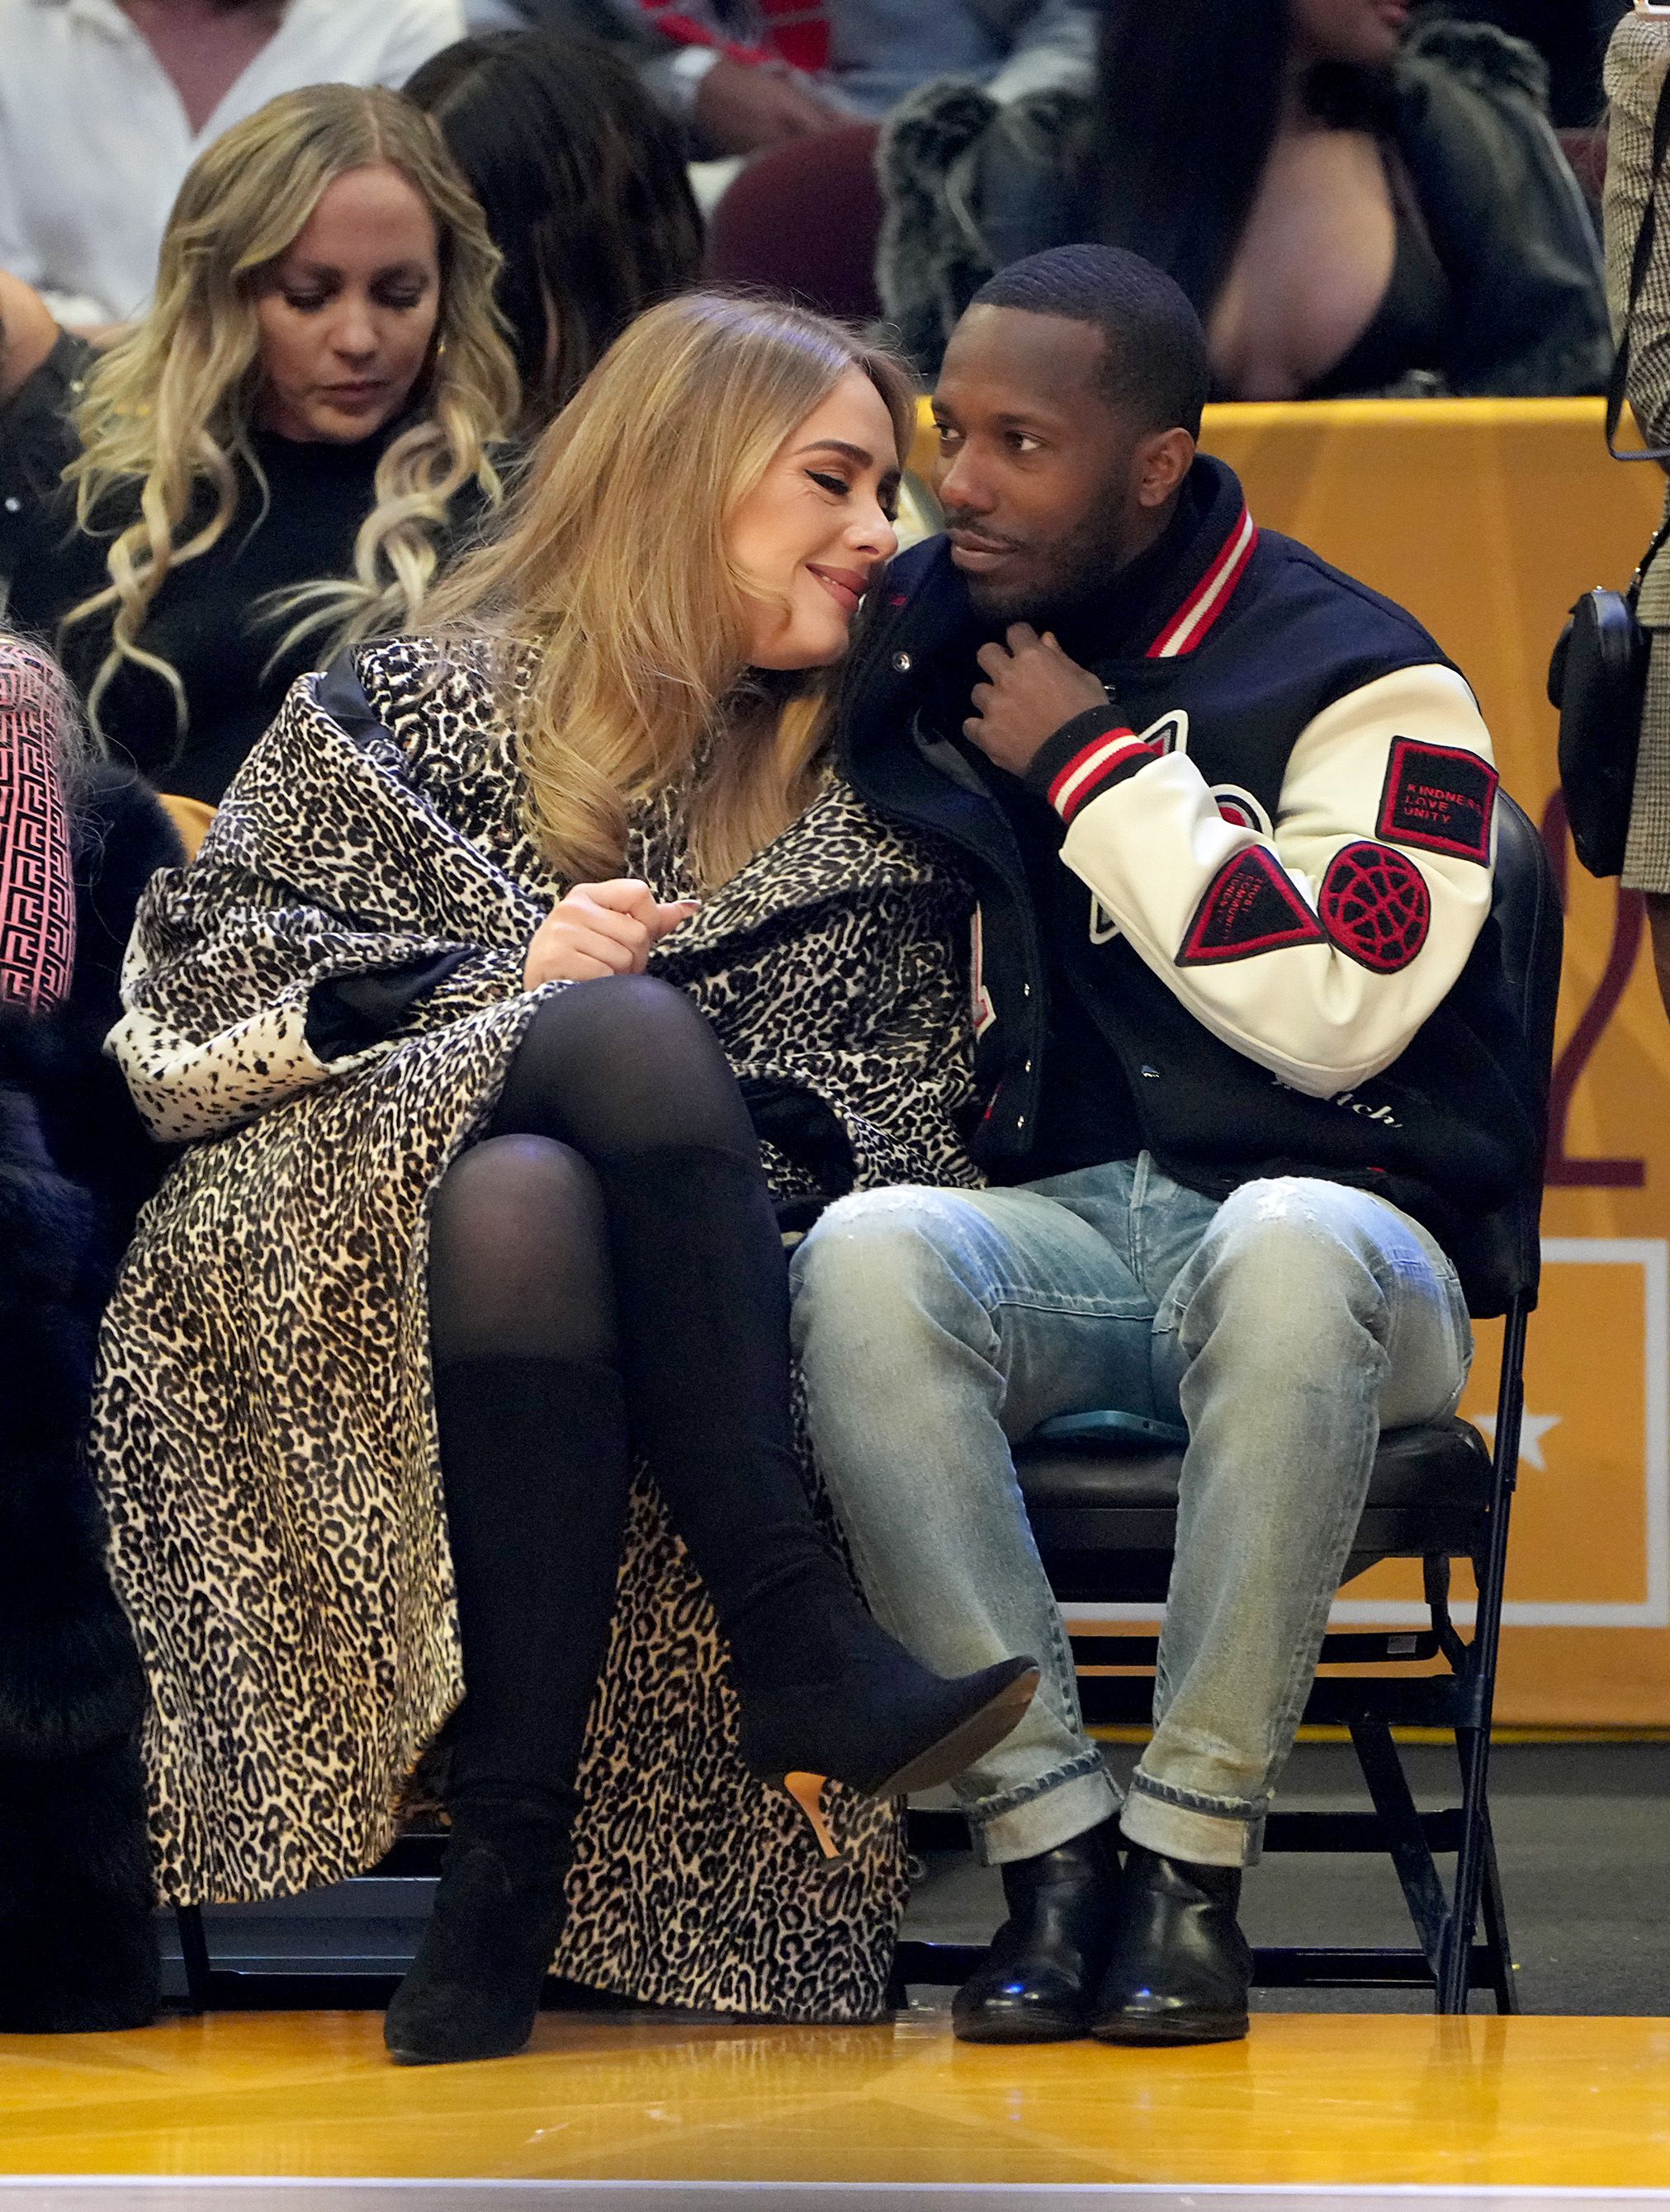 Adele And Rich Paul's Body Language, Explained By An Expert